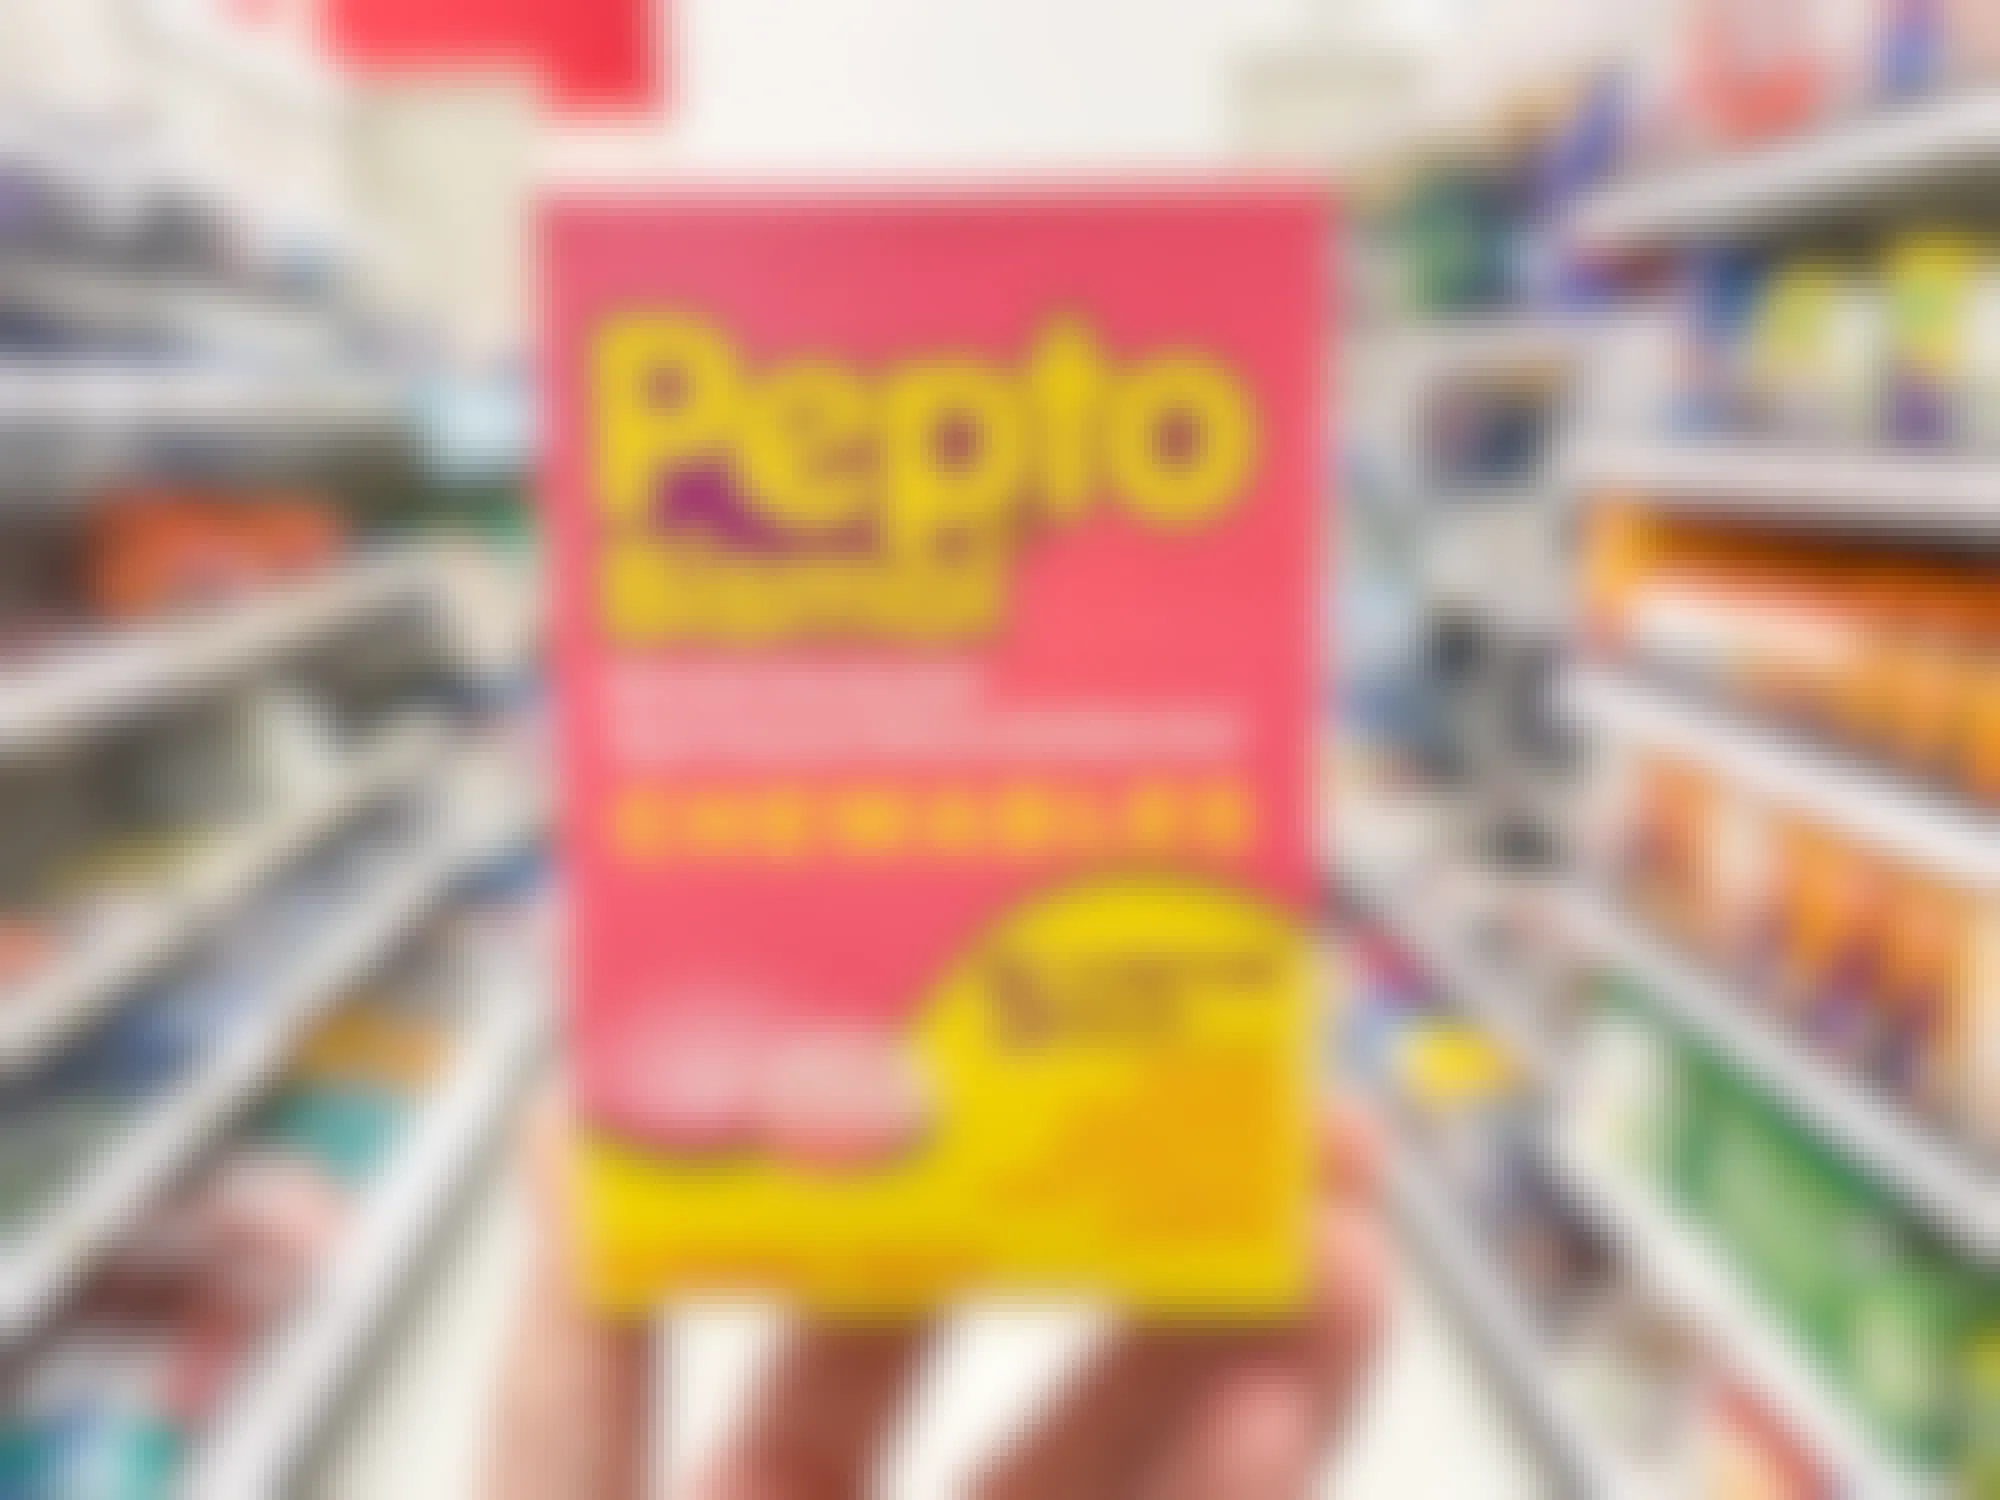 Someone holding a box of chewable Pepto Bismol tablets in a store